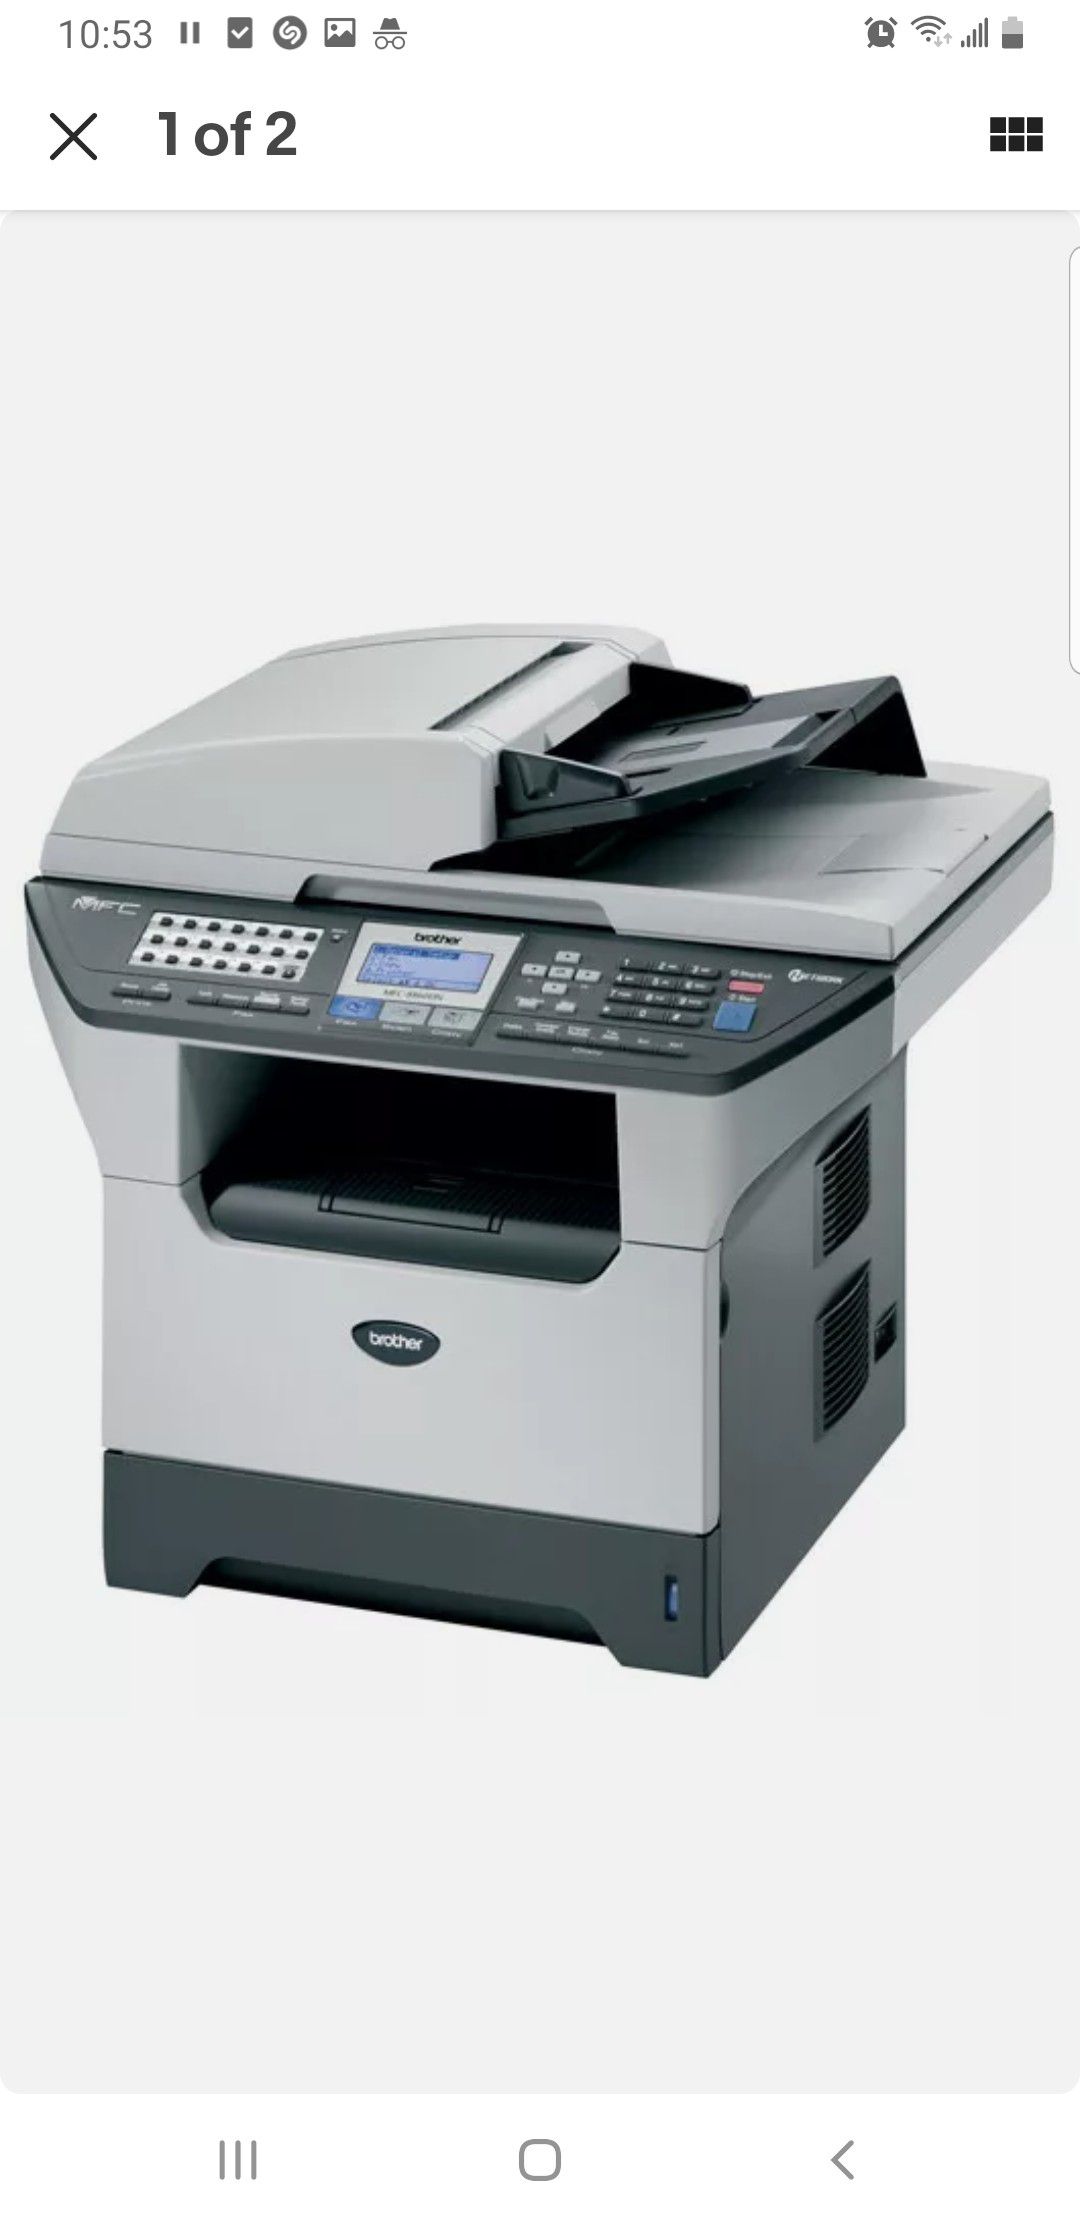 Printer : Brother MFC-8690DW All-In-One Laser Printer FAX Copier - complete!